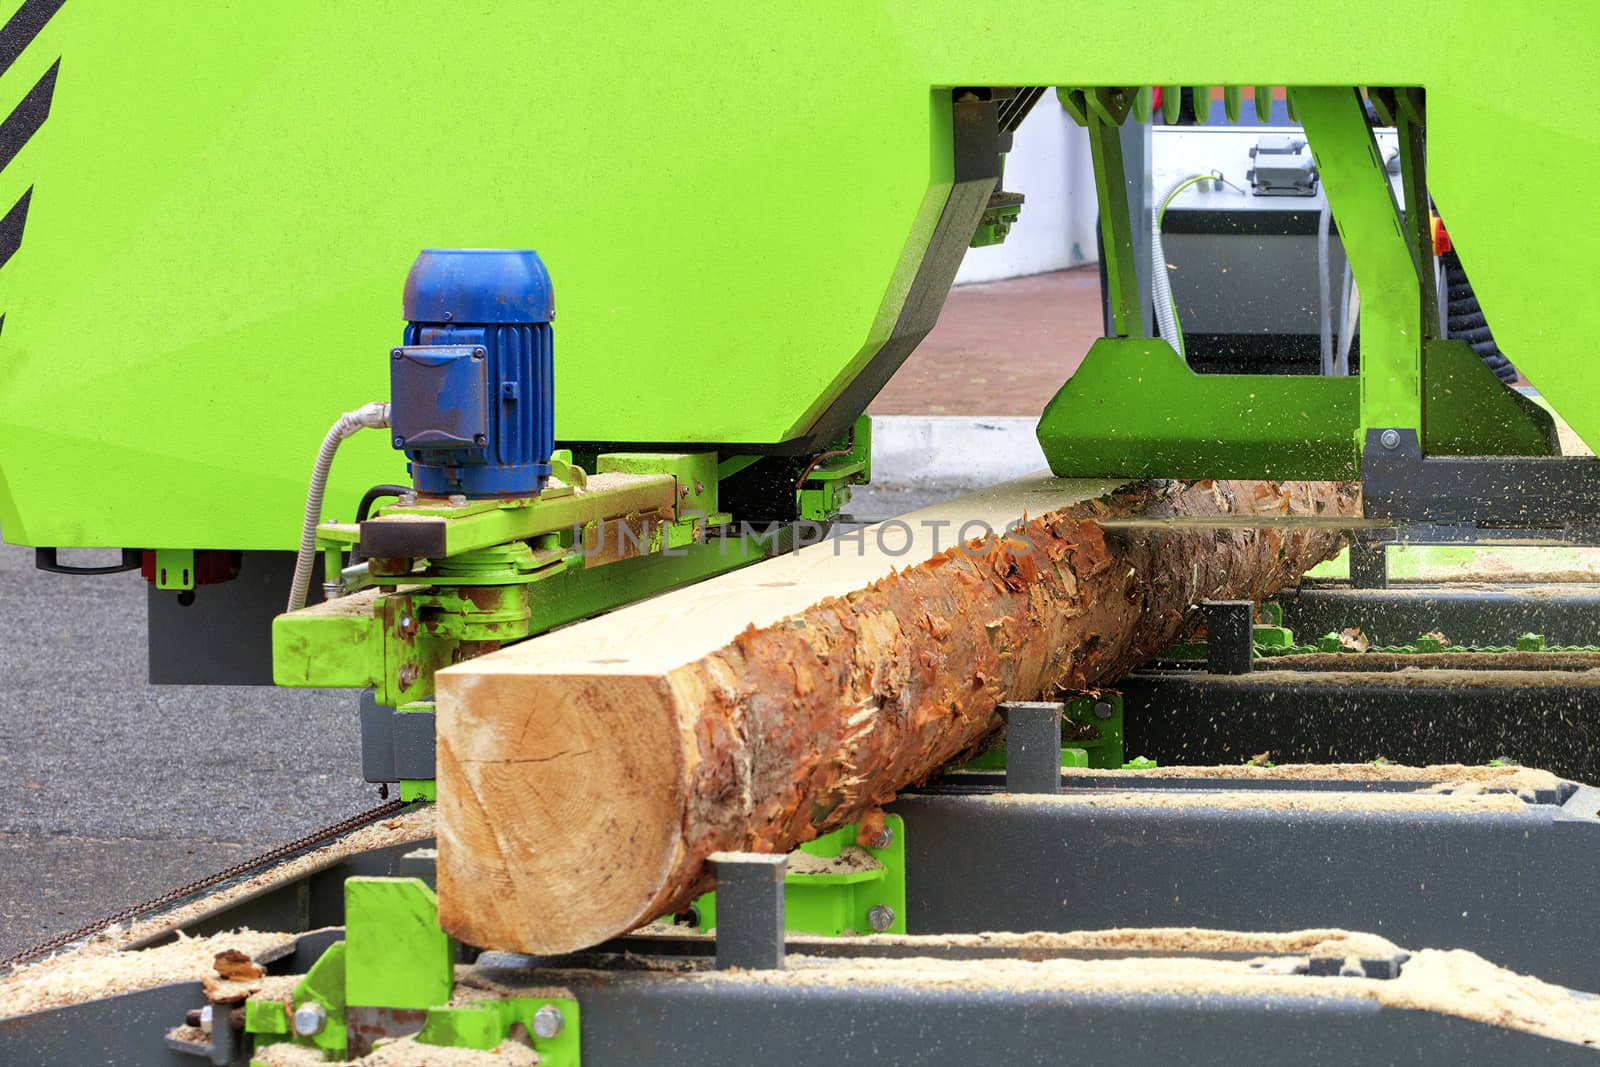 Woodworking, lumber, pine boards are made from large logs in a modern automatic sawmill.